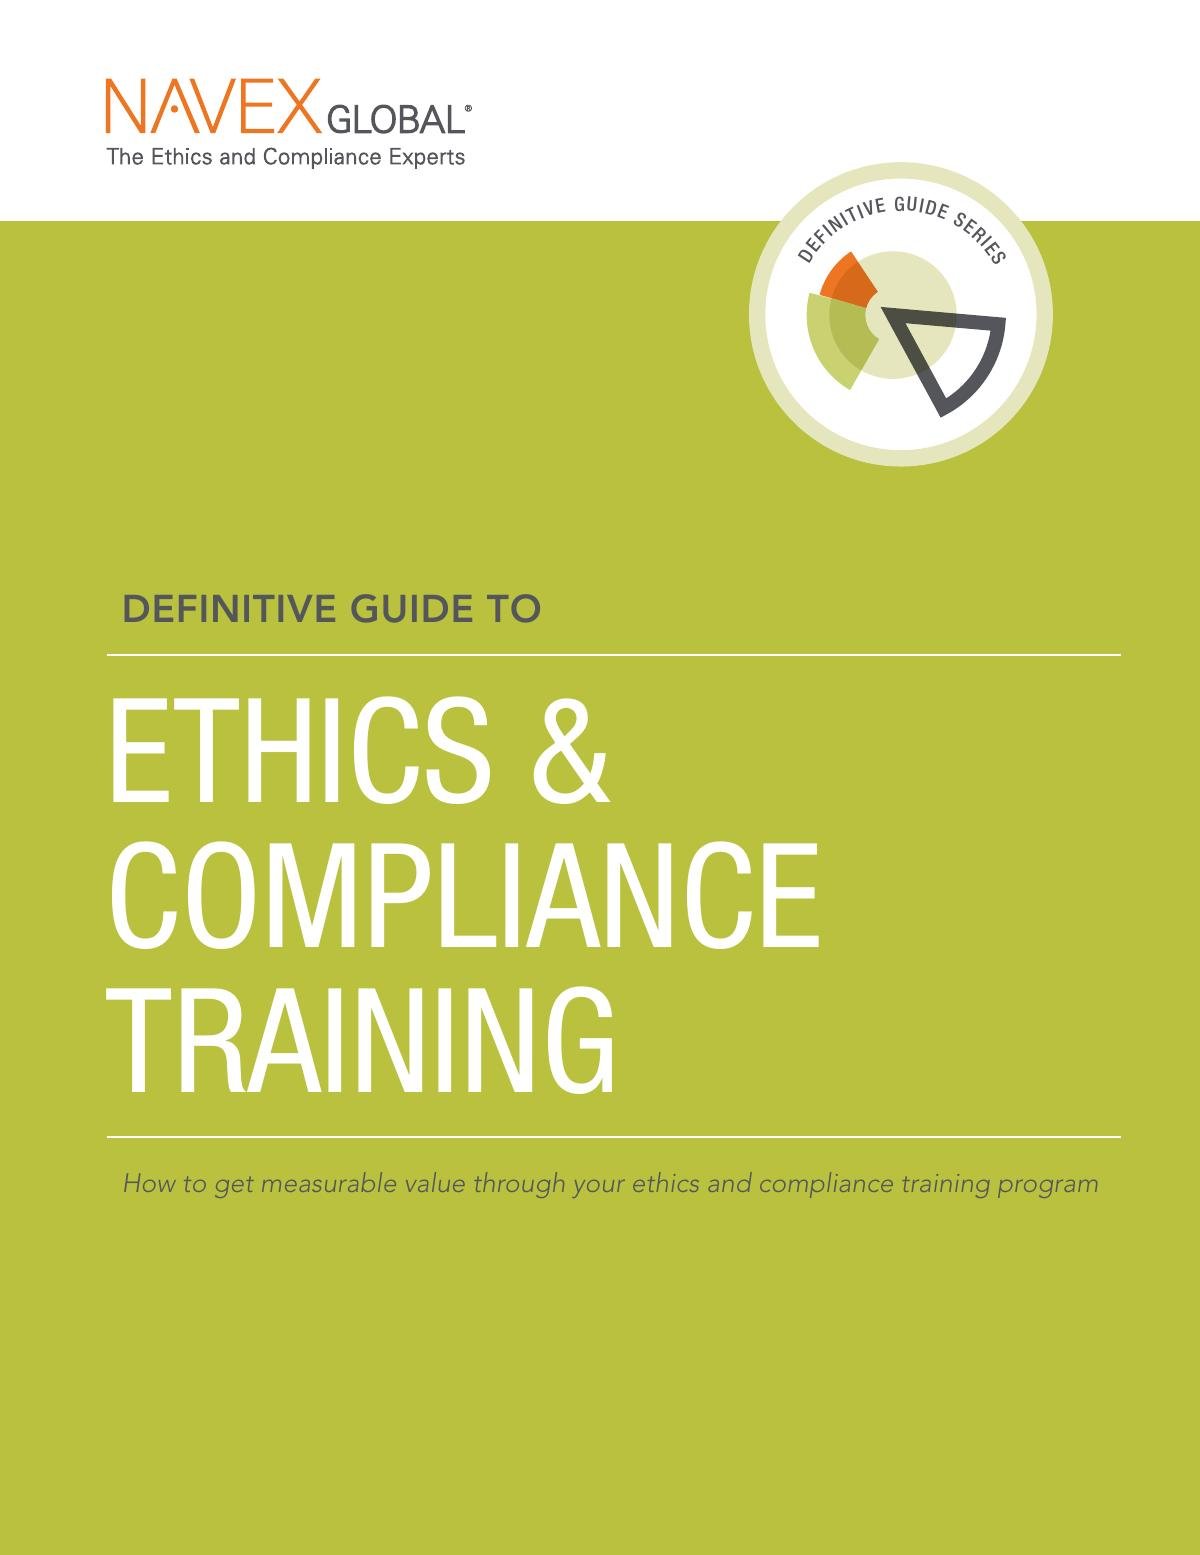 Definitive Guide to Ethics & Compliance Training